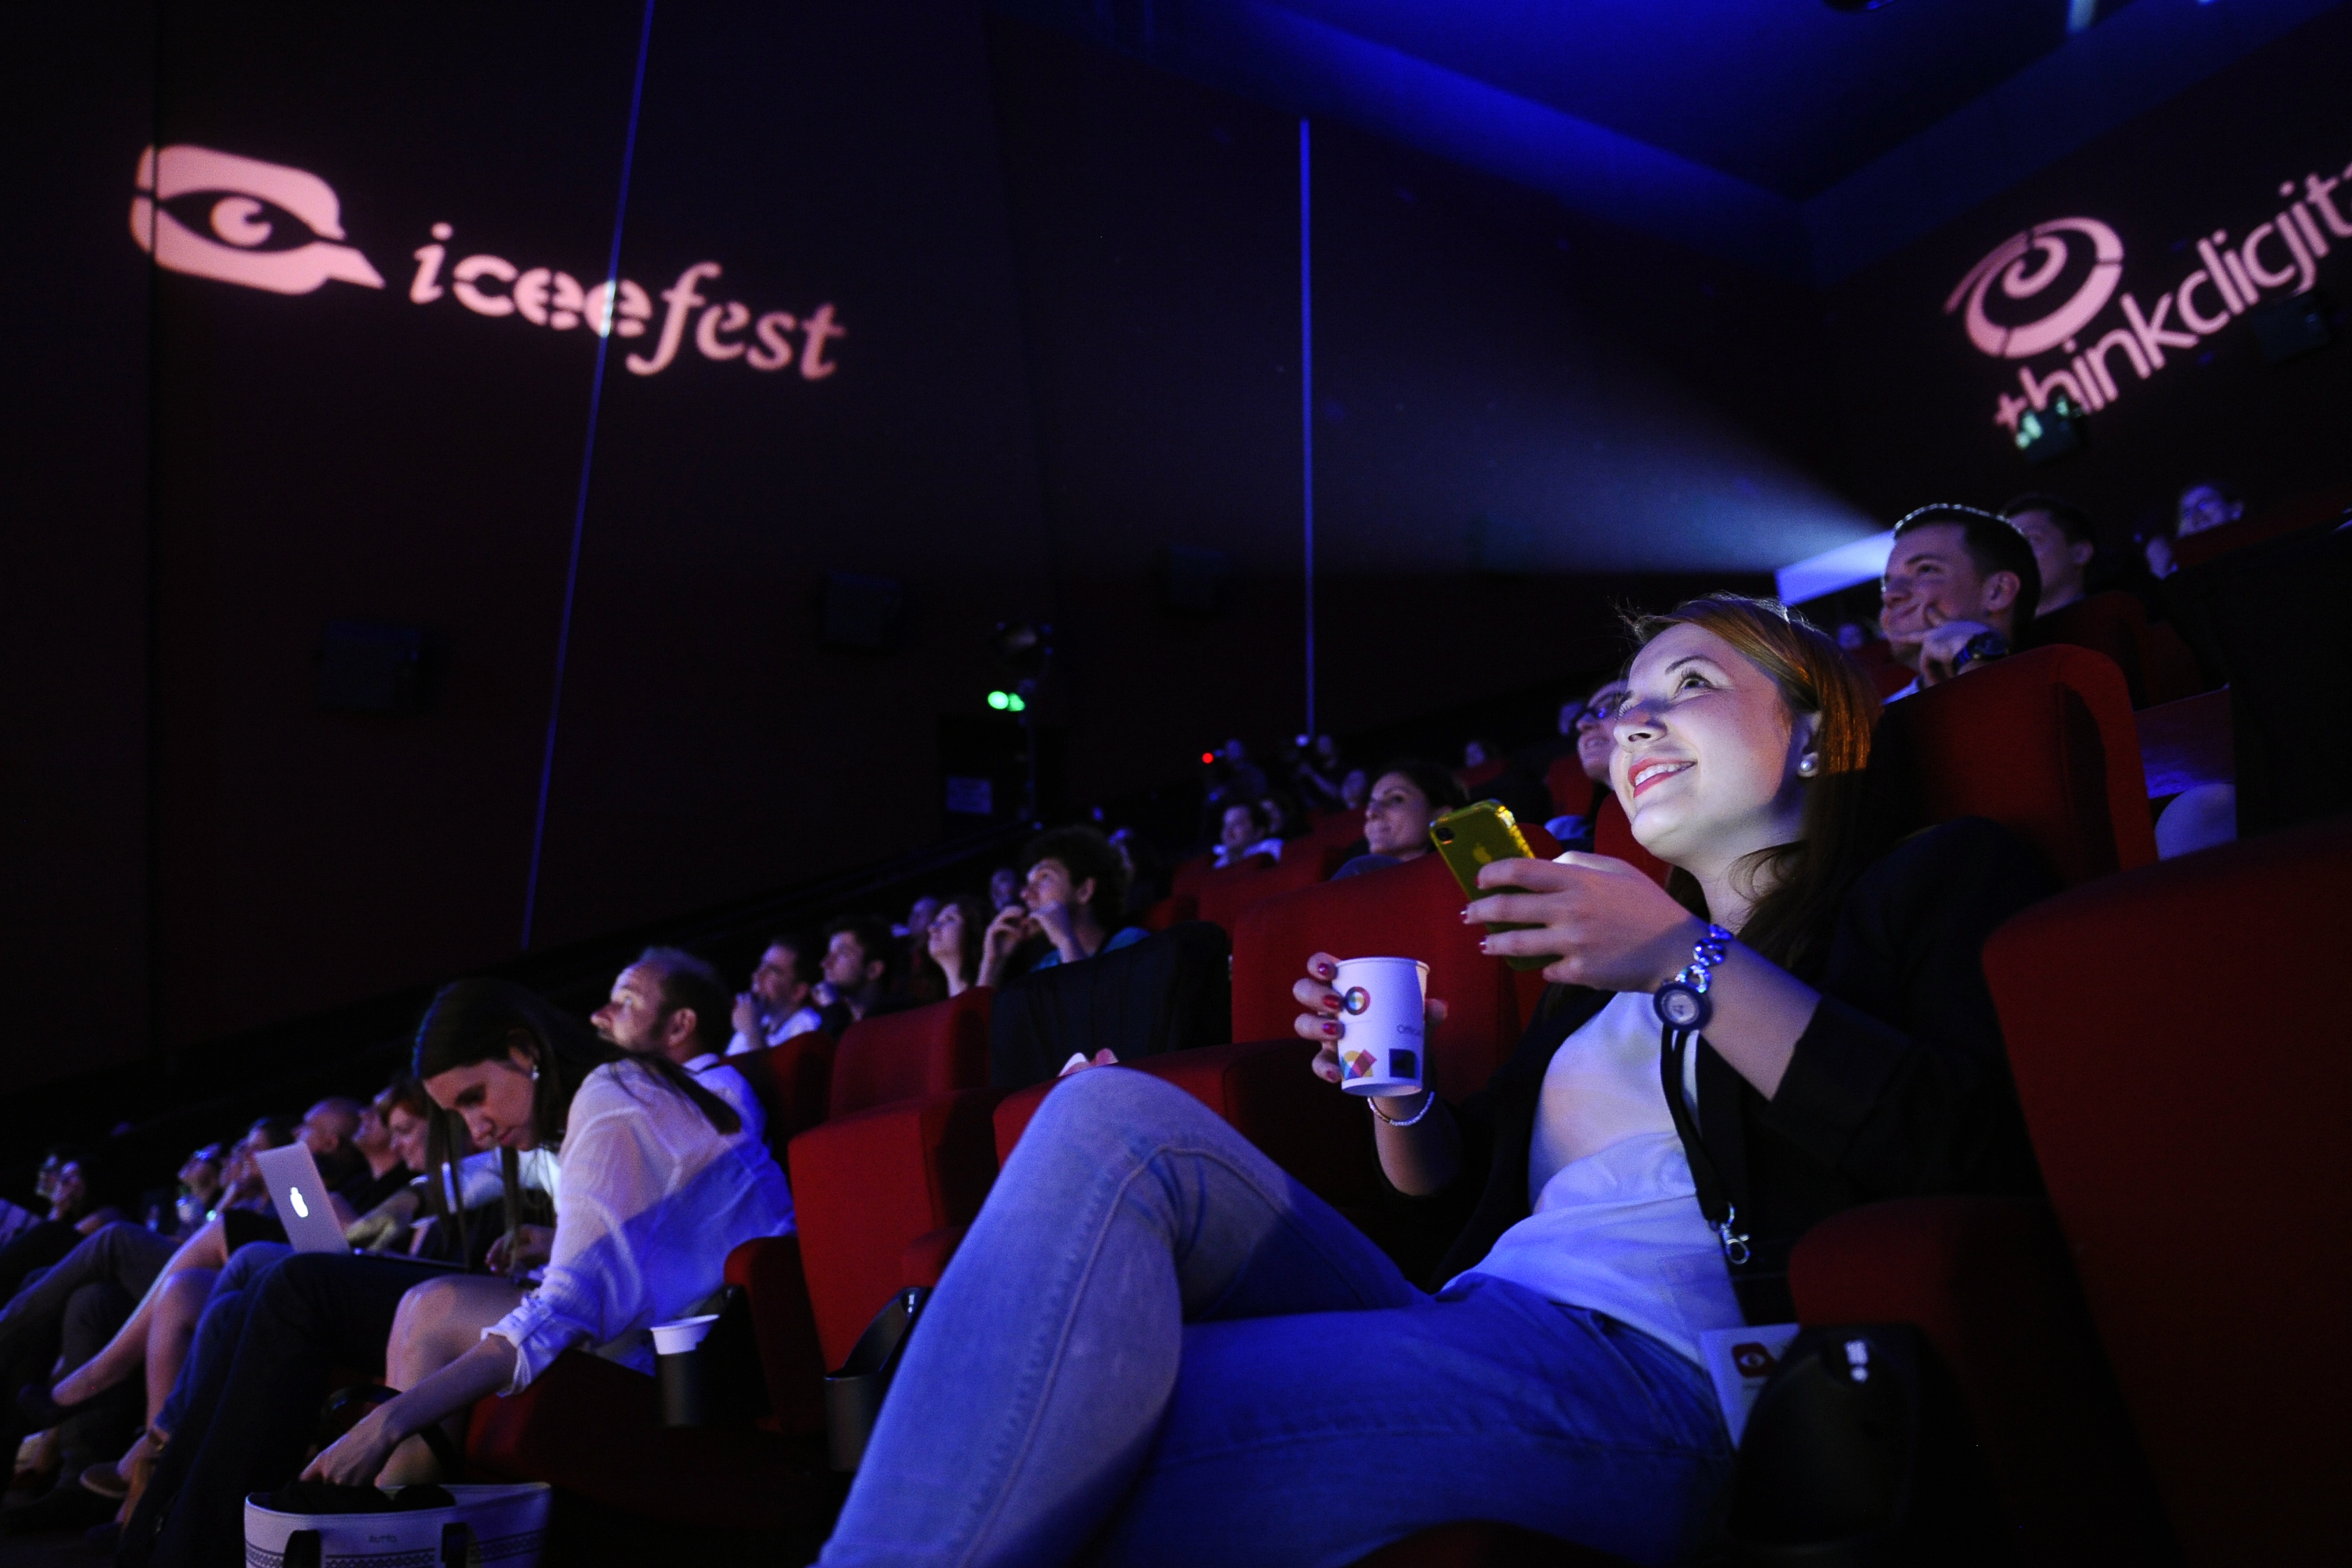 Thank you: thoughts and pictures after ICEEfest 2014